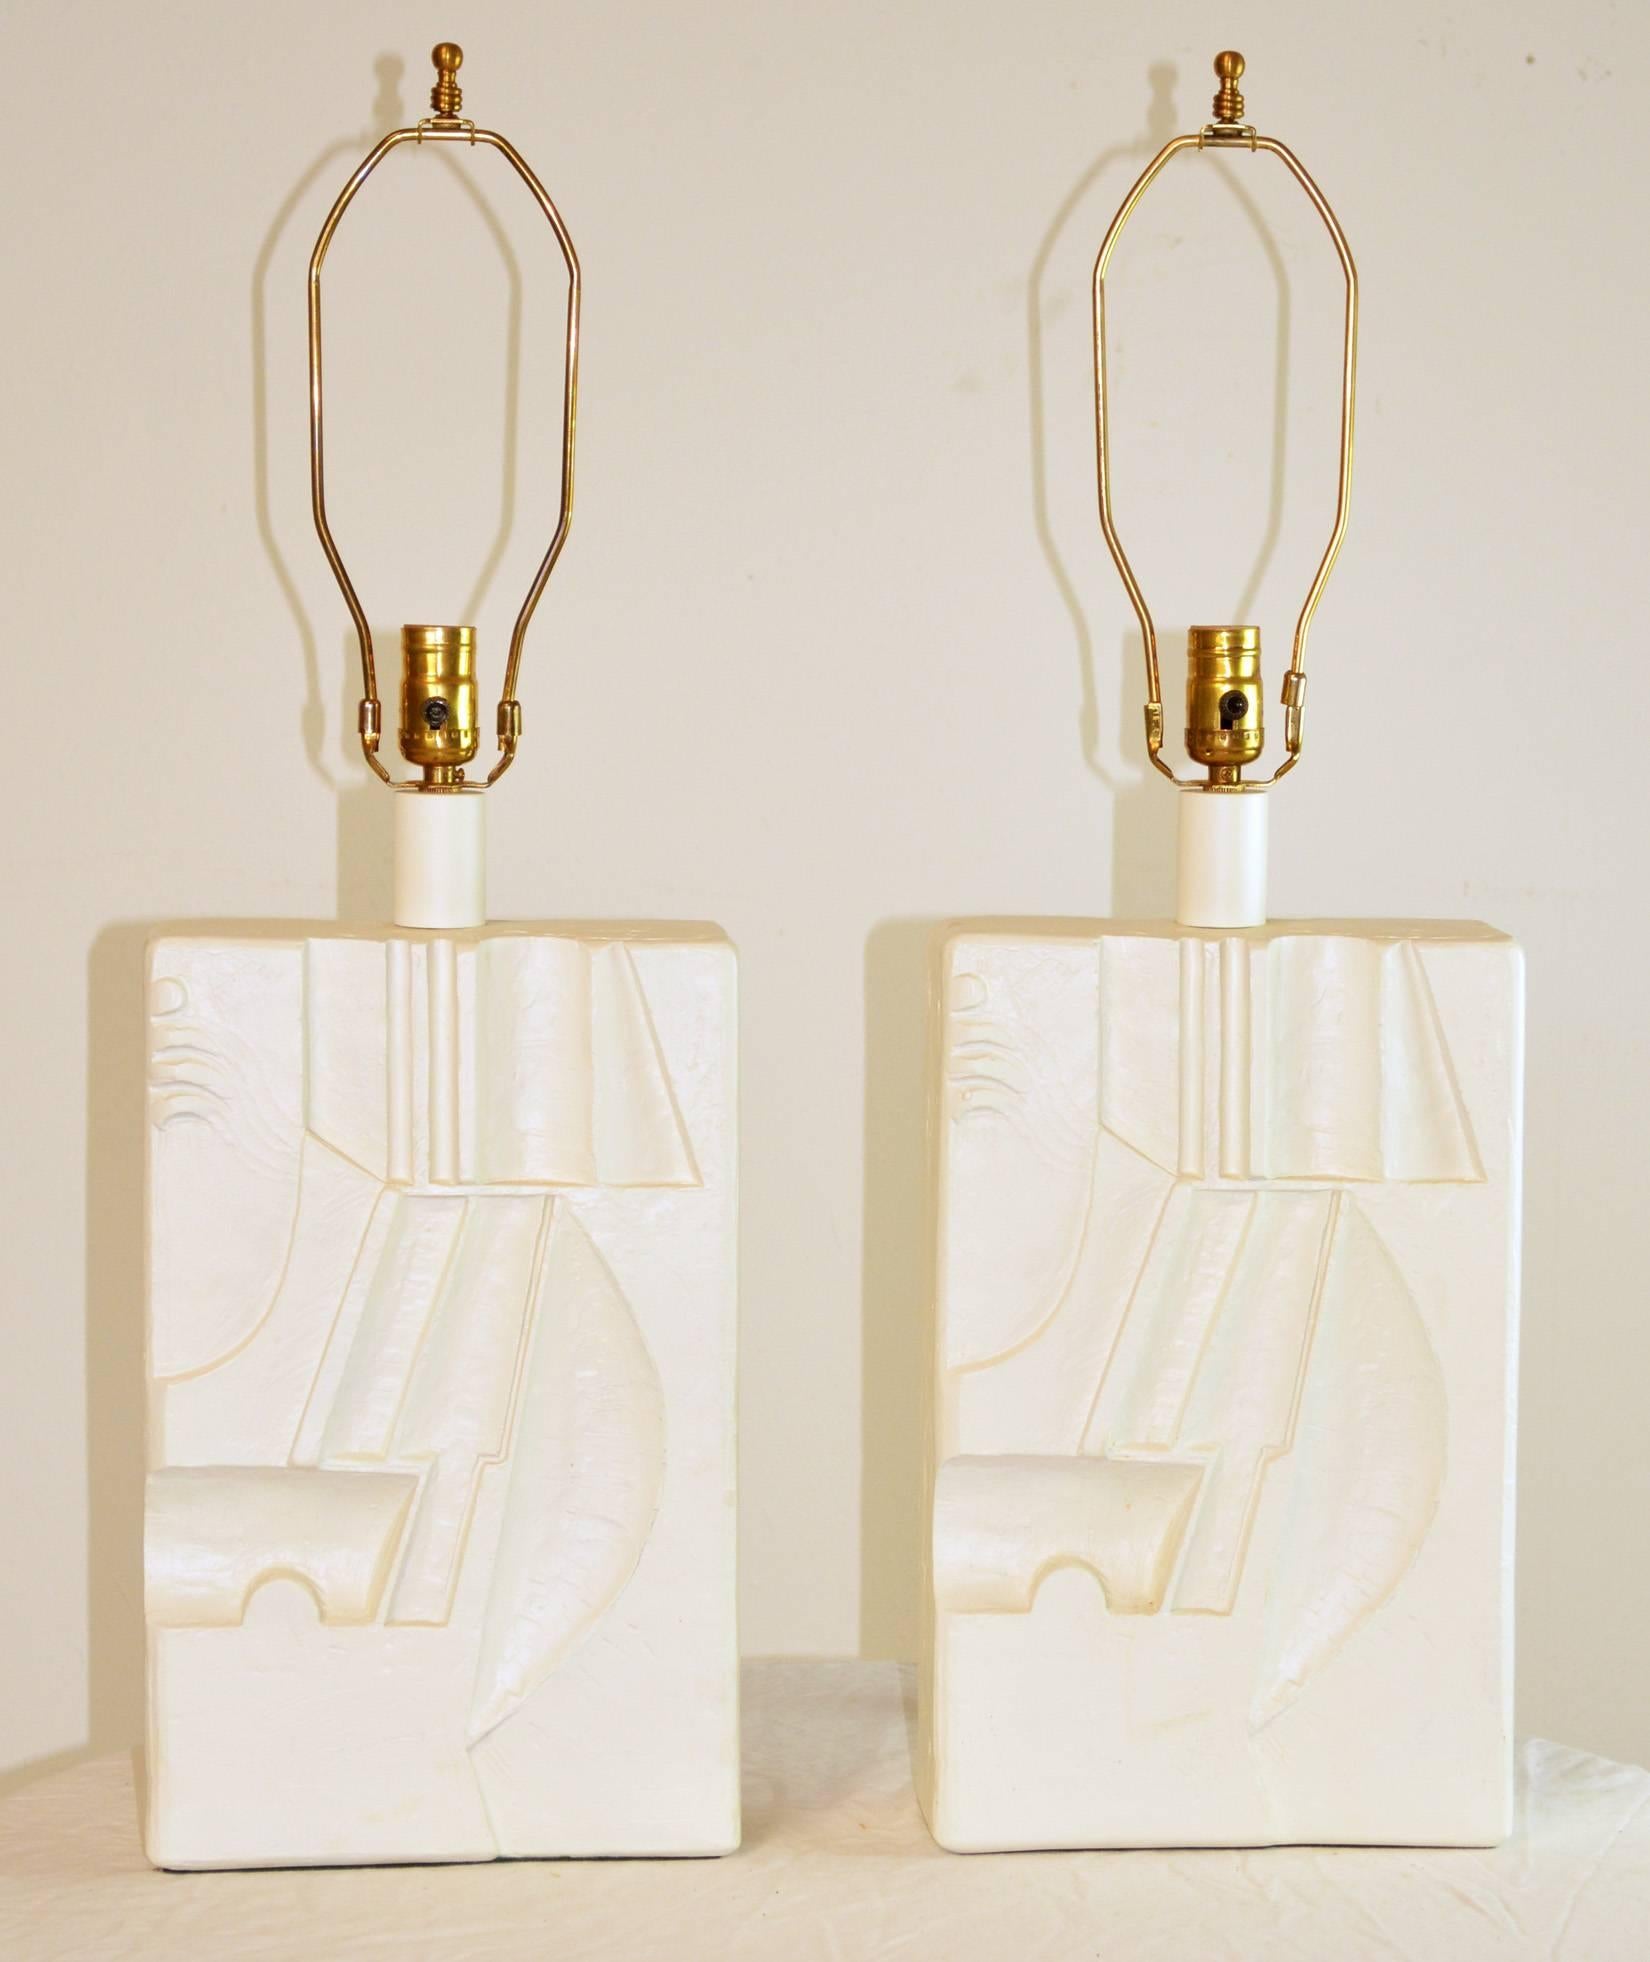 A pair of graphic lamps with incised sculpted decoration. Ceramic. 
Overall: 9.75" L x 3.75" W x 29" H. Height can be adjusted by adding a smaller or larger harp. Form: 9.75" L x 4" W x 21" H from base to top of socket.